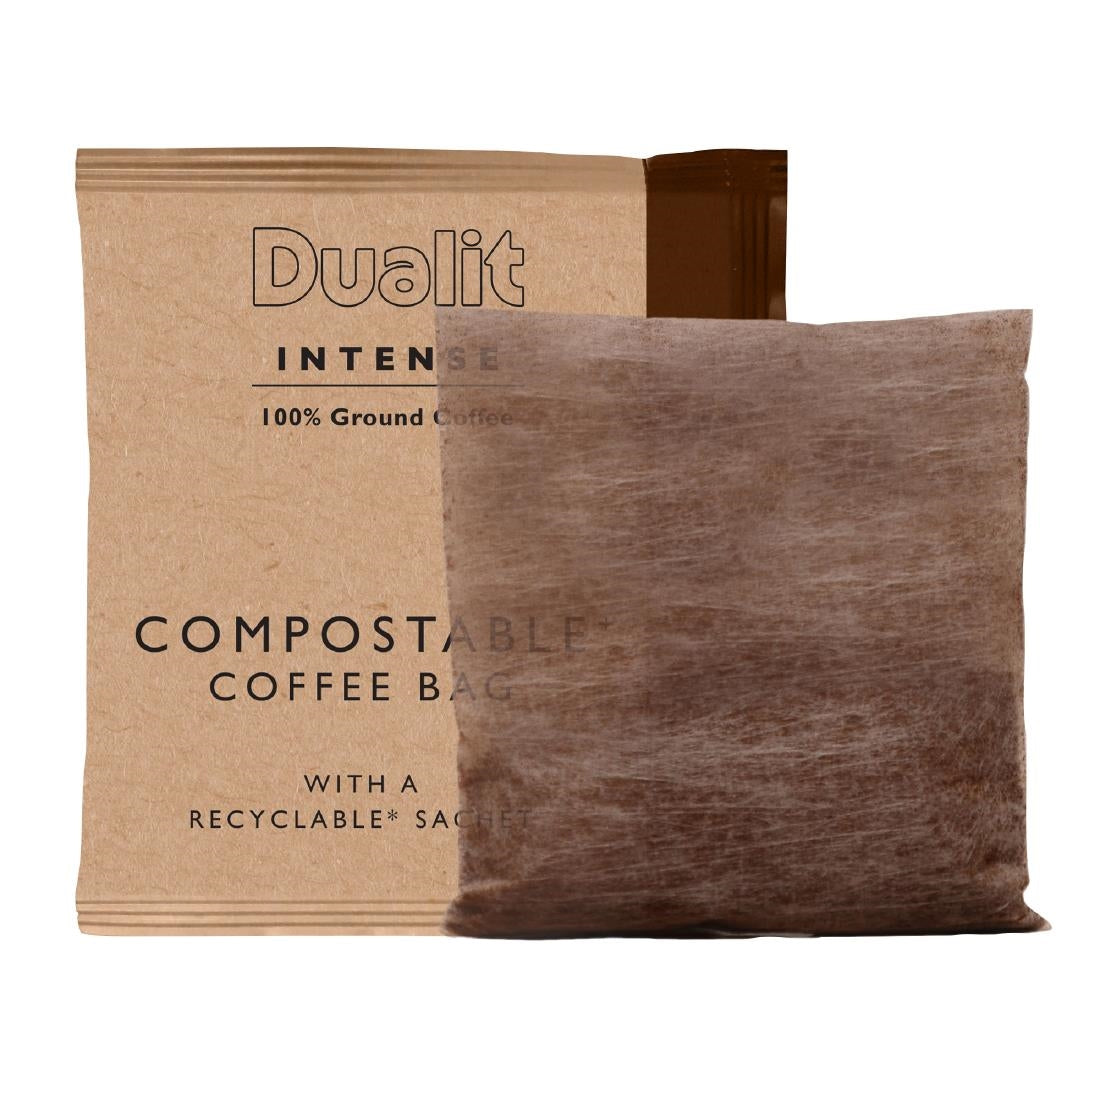 FX187 Dualit Intense Compostable Coffee Bags (Pack of 40)